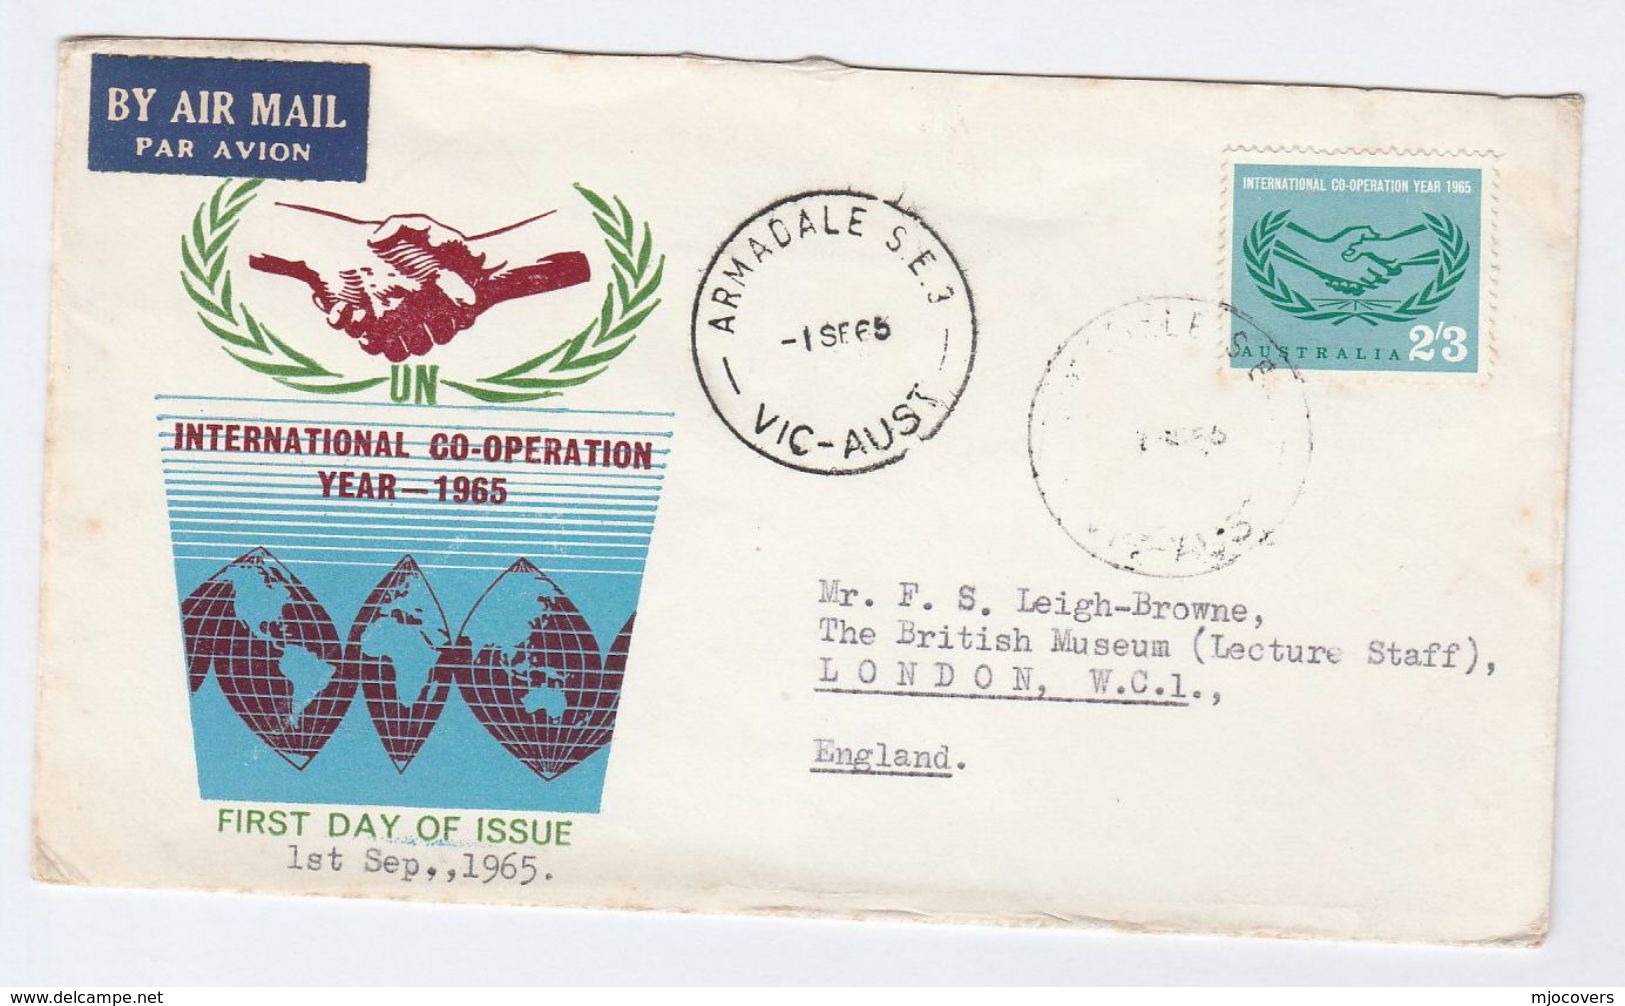 1965 Air Mail Armadale AUSTRALIA FDC 2/3 International Cooperation Year To GB  Un United Nations Airmail Label Cover - Primo Giorno D'emissione (FDC)